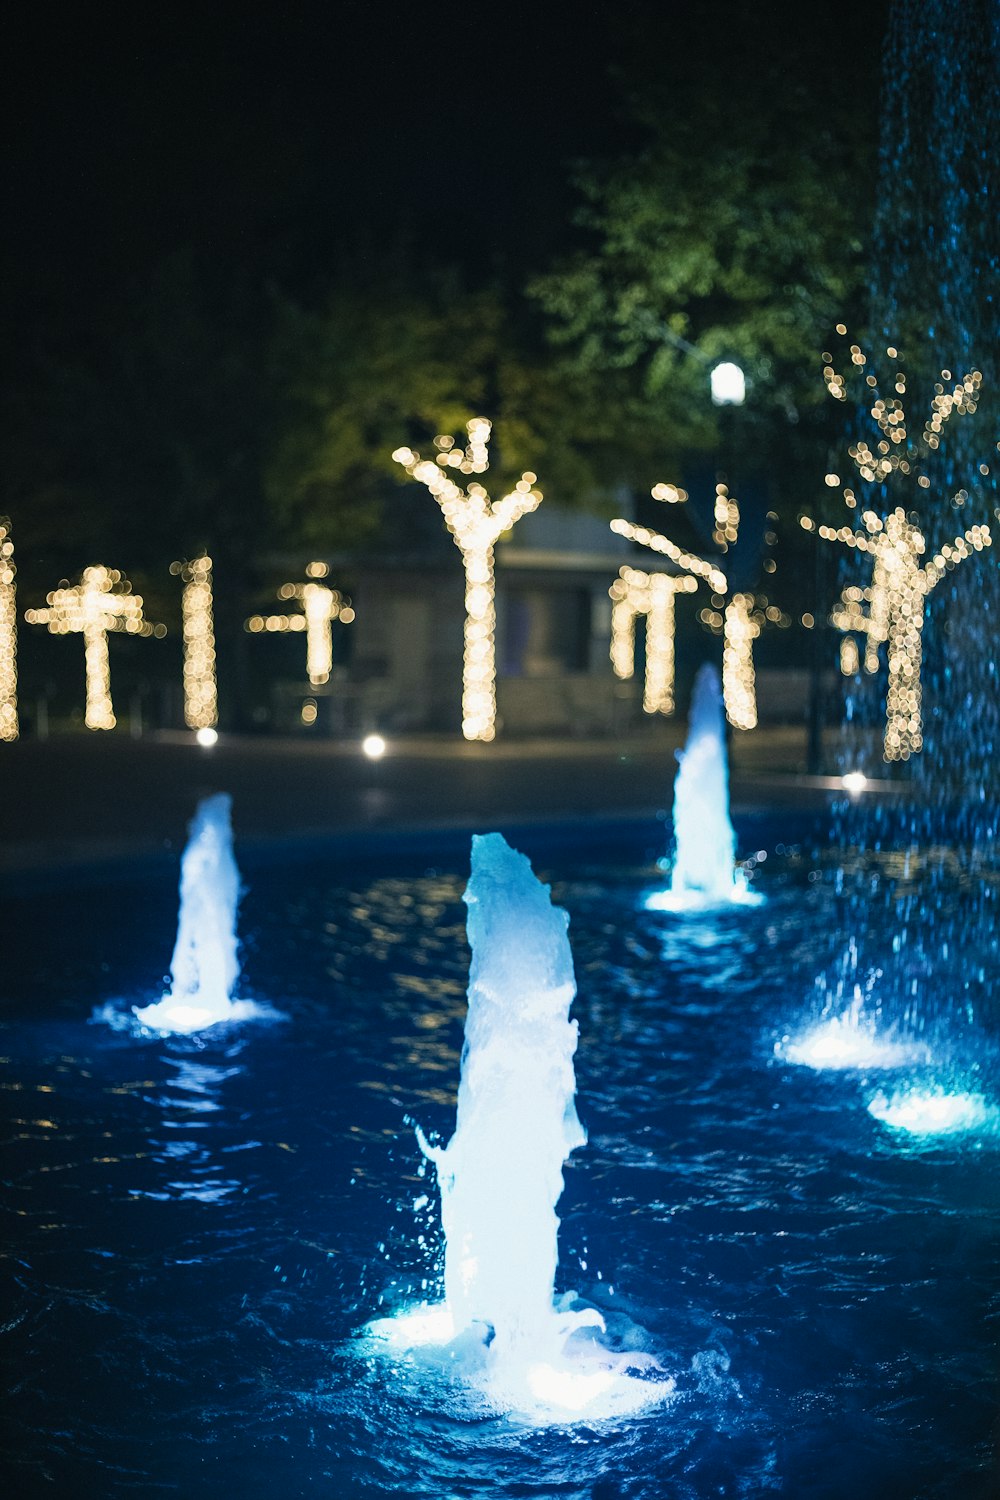 a group of water fountains in a park at night